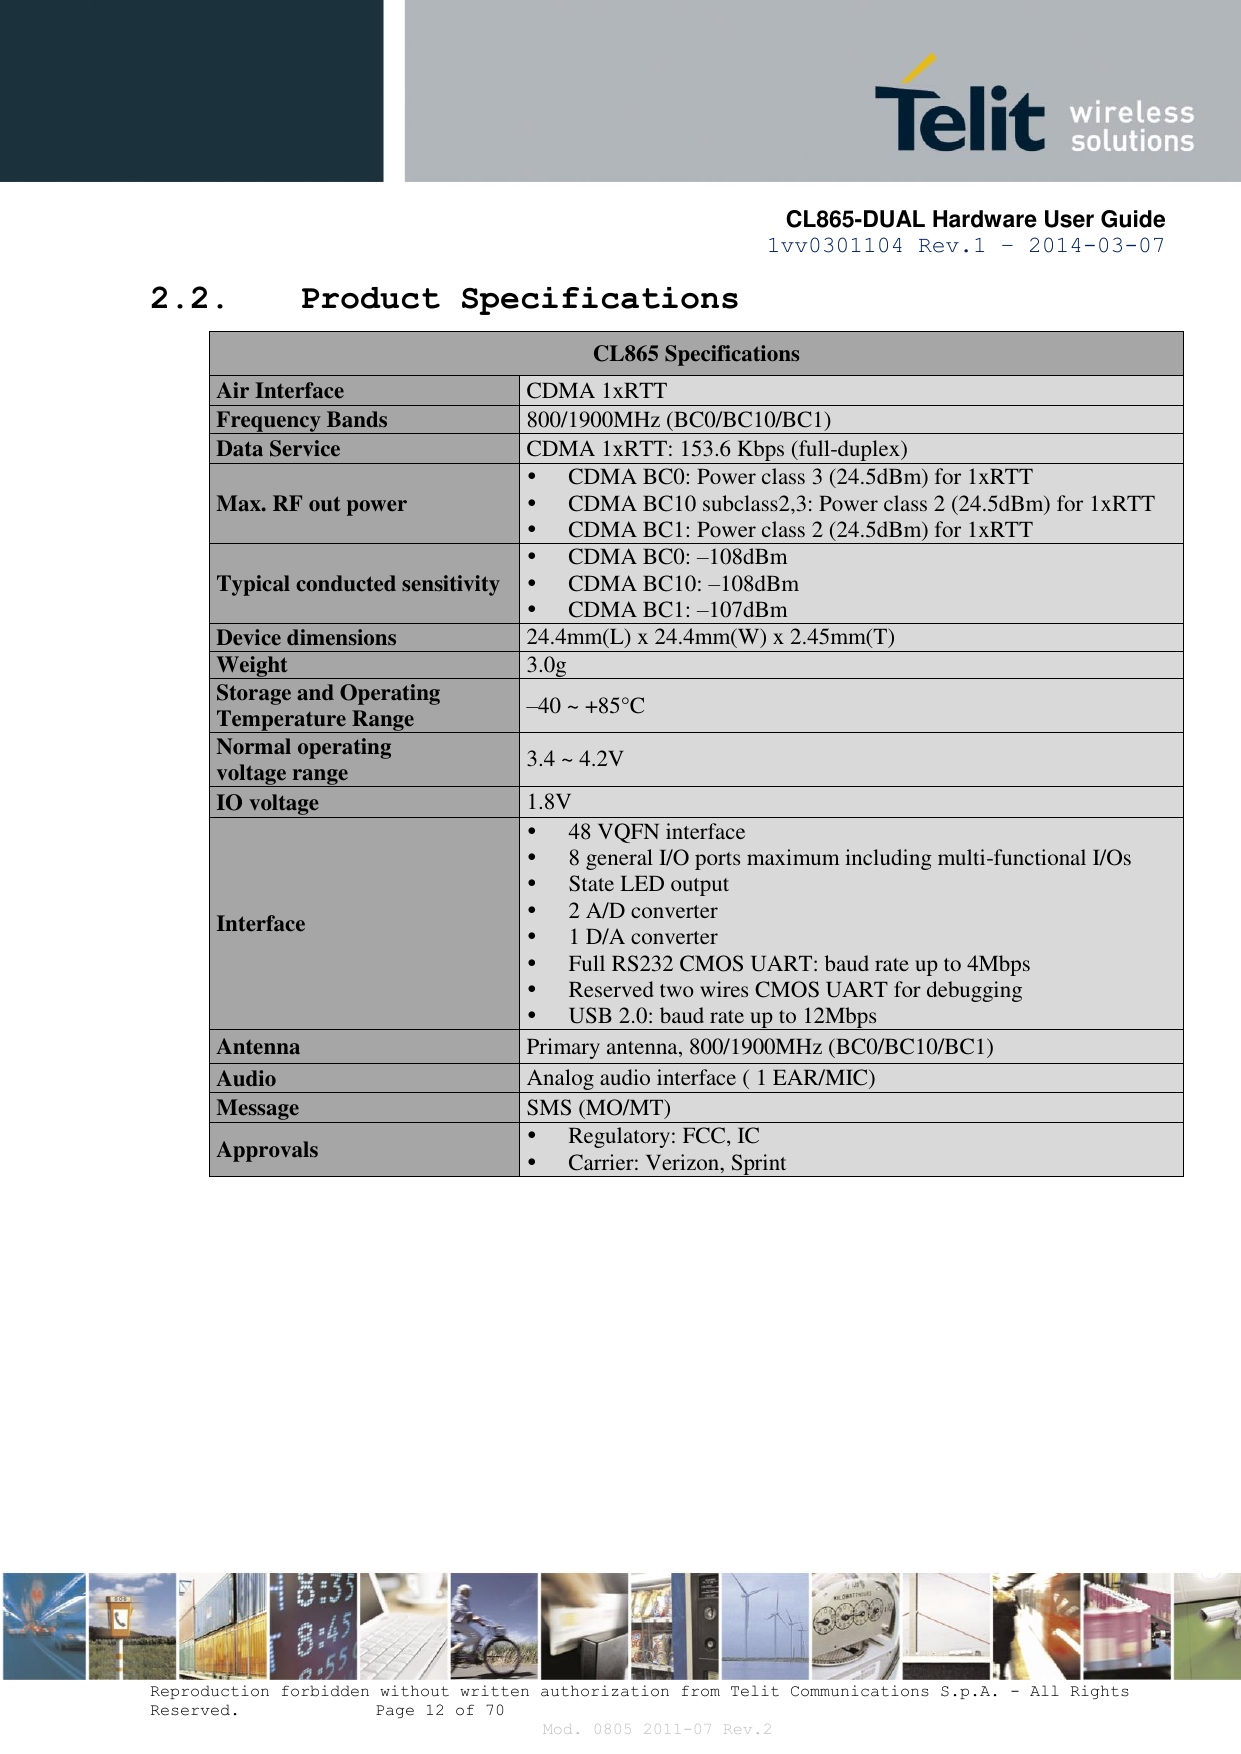       CL865-DUAL Hardware User Guide 1vv0301104 Rev.1 – 2014-03-07  Reproduction forbidden without written authorization from Telit Communications S.p.A. - All Rights Reserved.    Page 12 of 70 Mod. 0805 2011-07 Rev.2 2.2. Product Specifications  CL865 Specifications Air Interface CDMA 1xRTT Frequency Bands 800/1900MHz (BC0/BC10/BC1) Data Service CDMA 1xRTT: 153.6 Kbps (full-duplex) Max. RF out power  CDMA BC0: Power class 3 (24.5dBm) for 1xRTT  CDMA BC10 subclass2,3: Power class 2 (24.5dBm) for 1xRTT  CDMA BC1: Power class 2 (24.5dBm) for 1xRTT Typical conducted sensitivity  CDMA BC0: –108dBm  CDMA BC10: –108dBm  CDMA BC1: –107dBm  Device dimensions  24.4mm(L) x 24.4mm(W) x 2.45mm(T) Weight 3.0g Storage and Operating  Temperature Range –40 ~ +85°C Normal operating voltage range 3.4 ~ 4.2V IO voltage 1.8V Interface  48 VQFN interface  8 general I/O ports maximum including multi-functional I/Os  State LED output  2 A/D converter   1 D/A converter  Full RS232 CMOS UART: baud rate up to 4Mbps  Reserved two wires CMOS UART for debugging  USB 2.0: baud rate up to 12Mbps Antenna Primary antenna, 800/1900MHz (BC0/BC10/BC1) Audio Analog audio interface ( 1 EAR/MIC) Message SMS (MO/MT) Approvals  Regulatory: FCC, IC  Carrier: Verizon, Sprint  